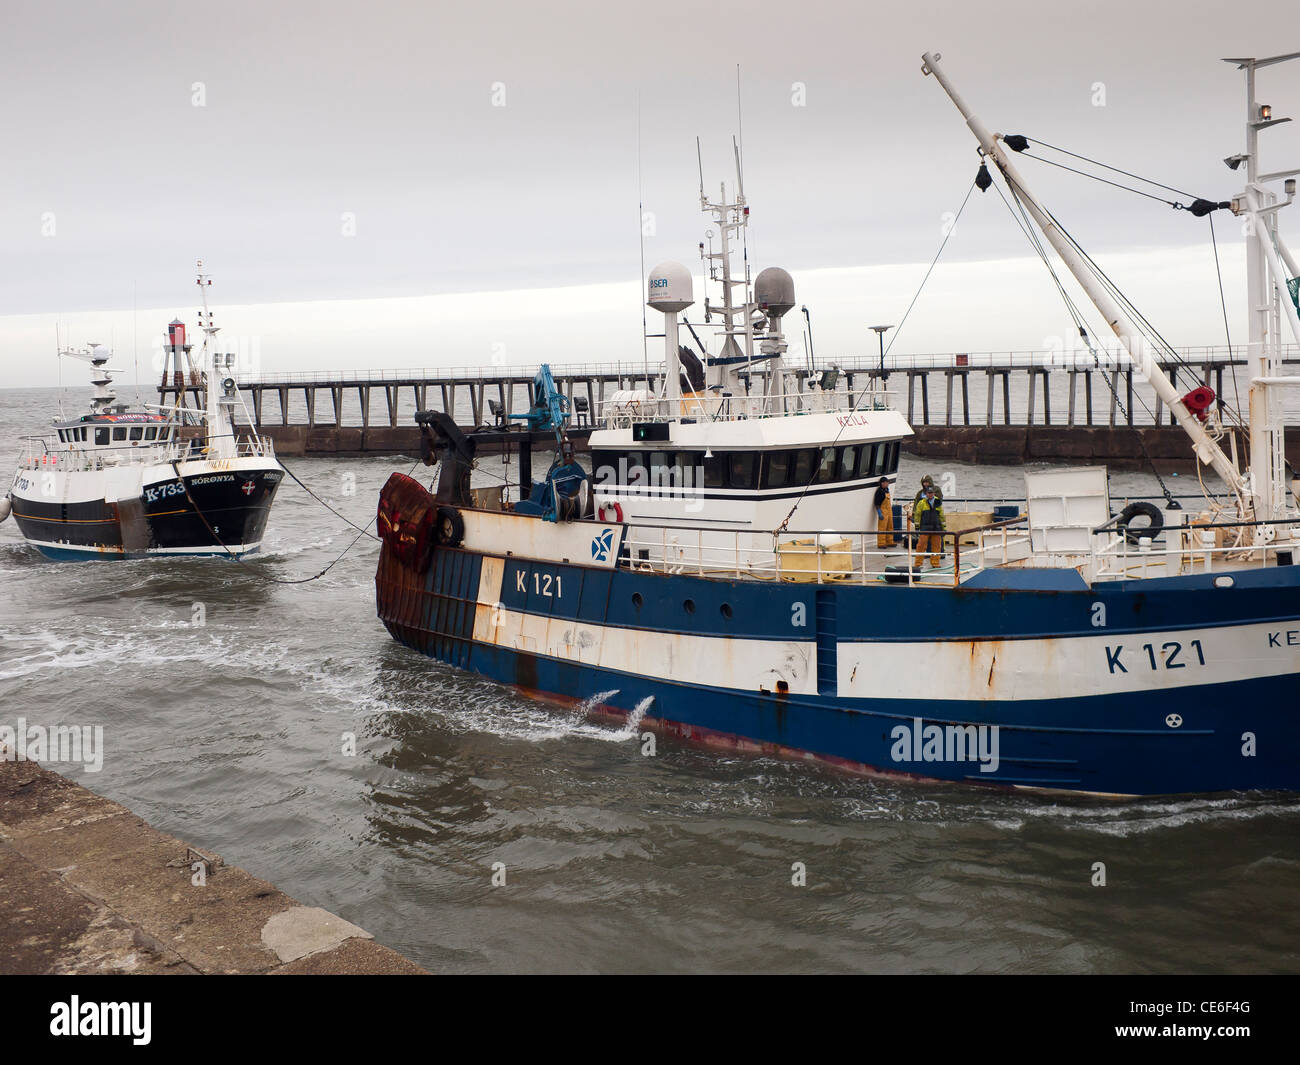 A crab fishing boat Noronya being towed into Whitby harbour for repairs by trawler Keila both boats from Kirkwall Orkney Stock Photo